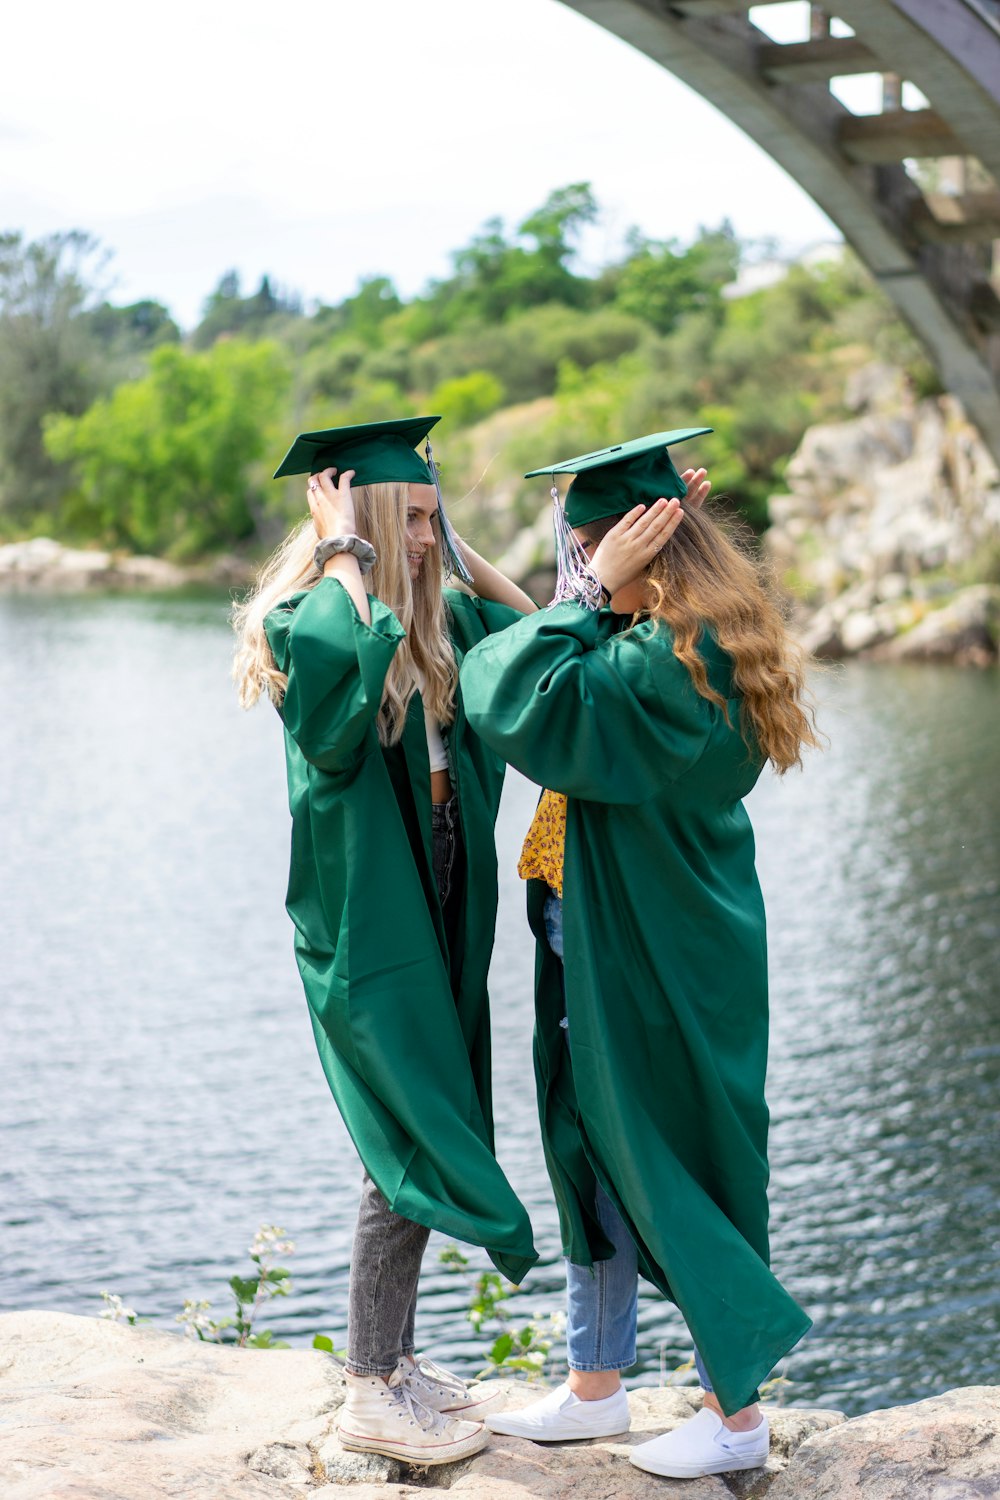 woman in green academic dress and black mortar board standing on river during daytime